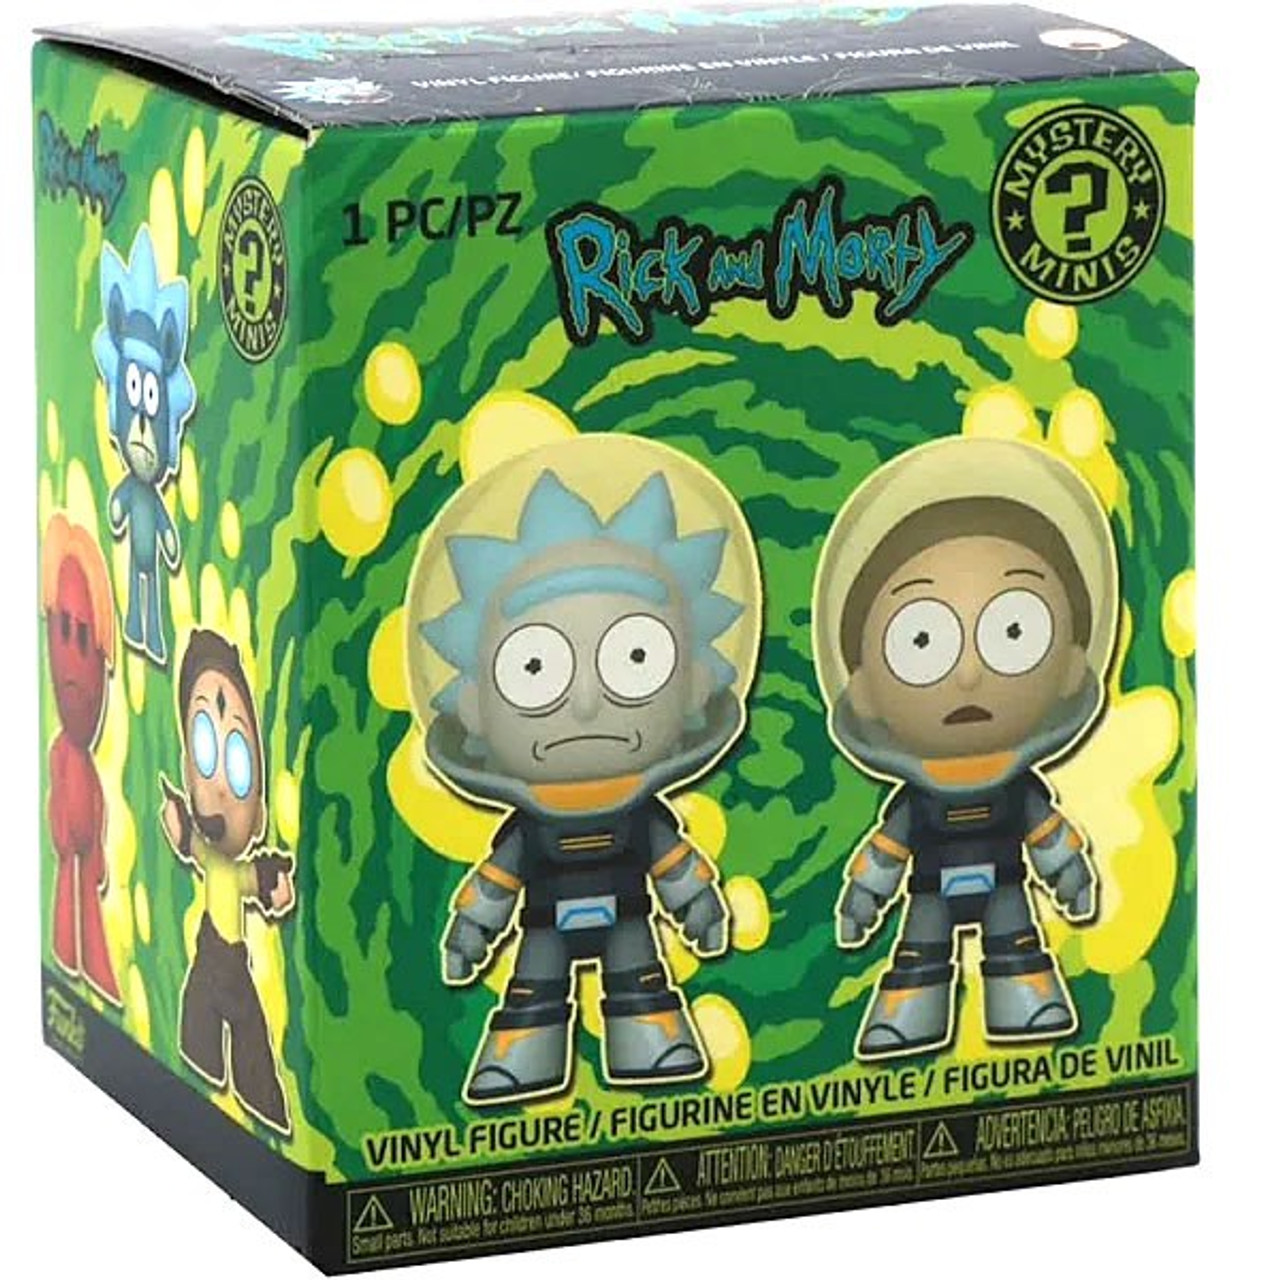 Krombopulos Michael for sale online Funko Mystery Minis Rick and Morty Series 2